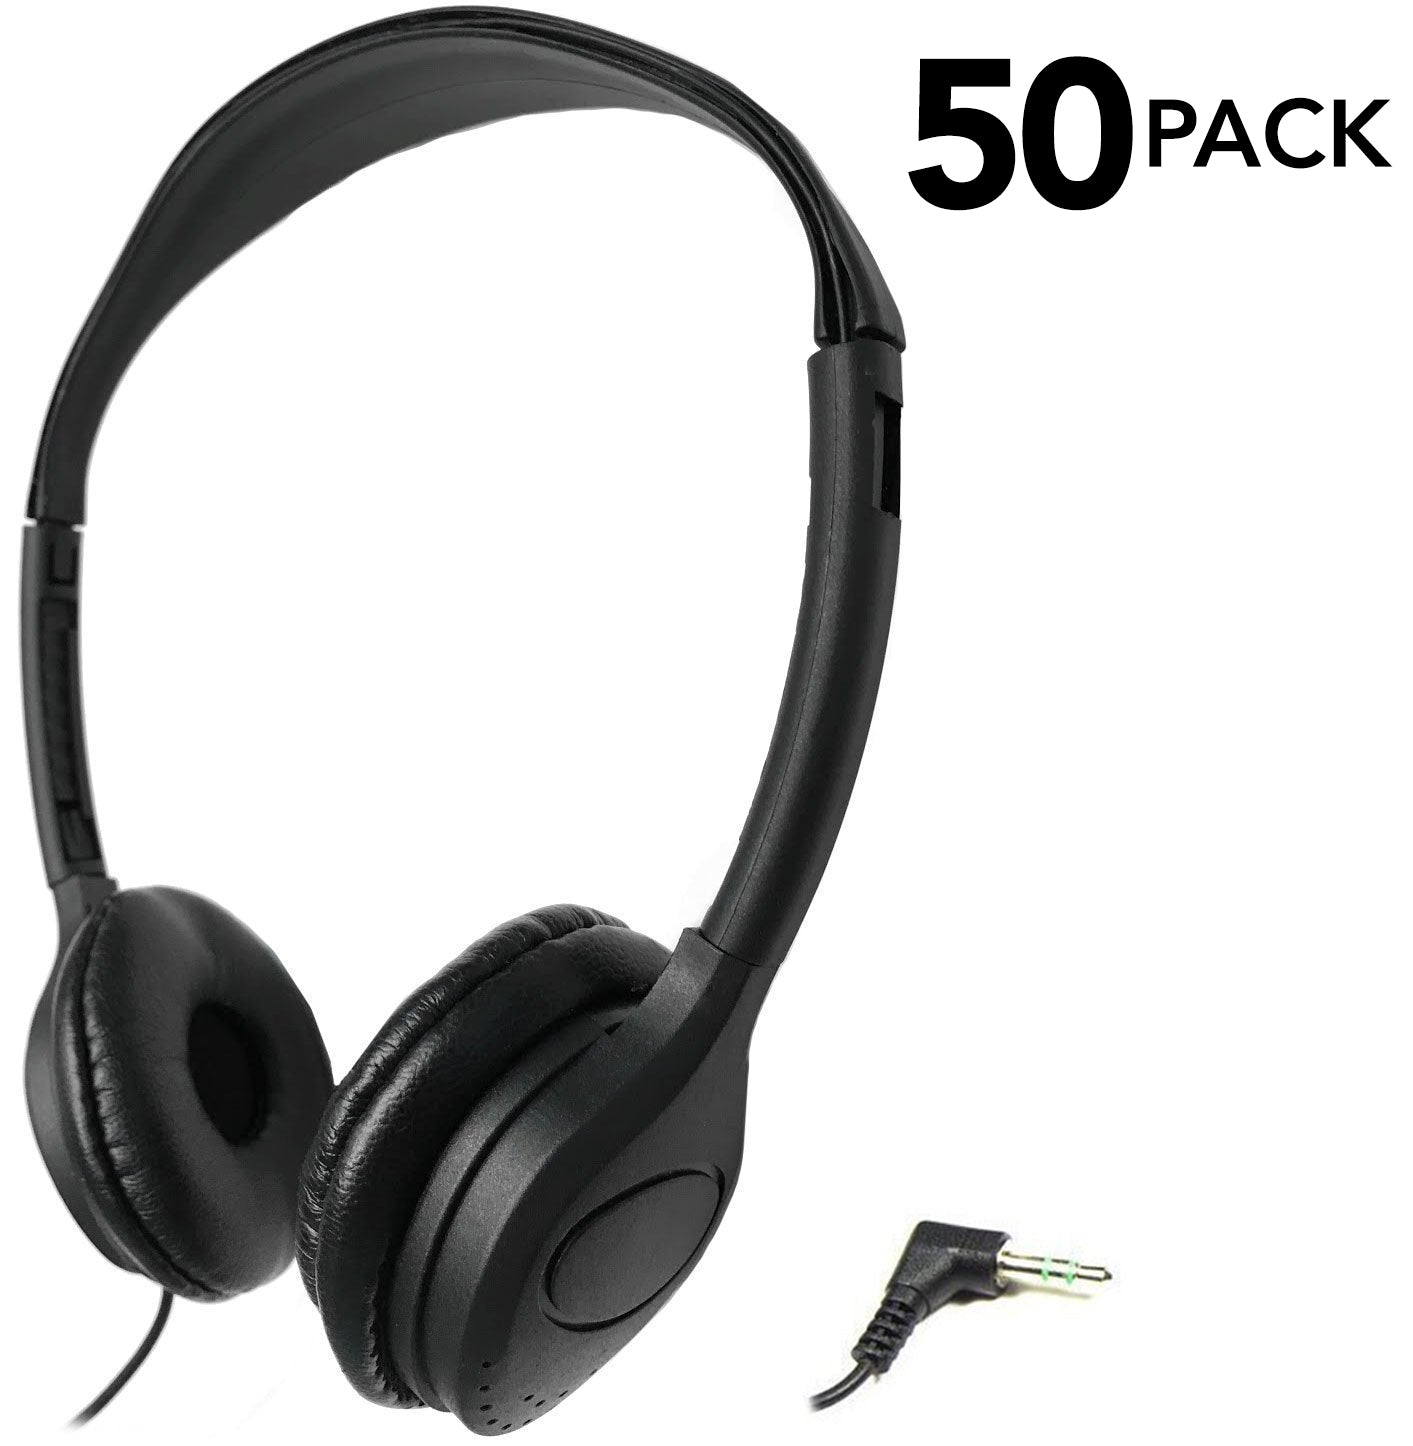 Bulk Pack of 50 Low-Cost Headphones by SmithOutlet